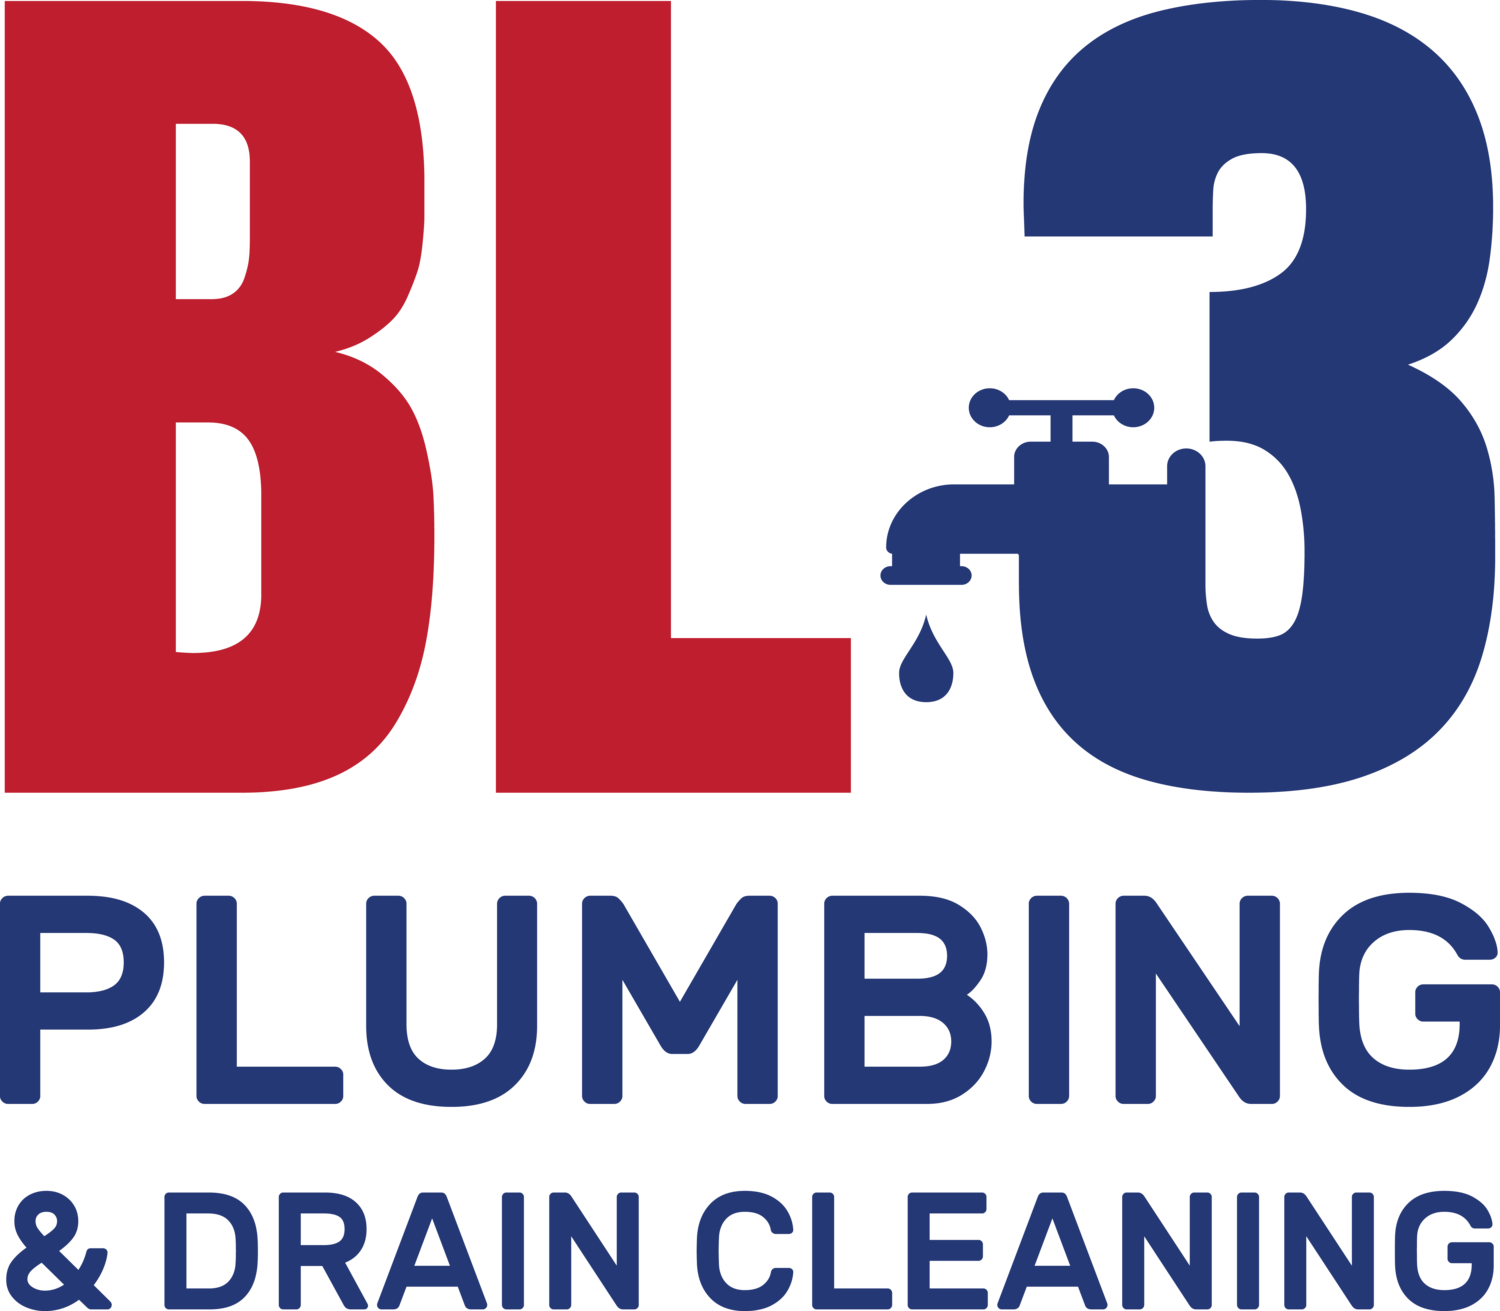 BL3 Plumbing & Drain Cleaning